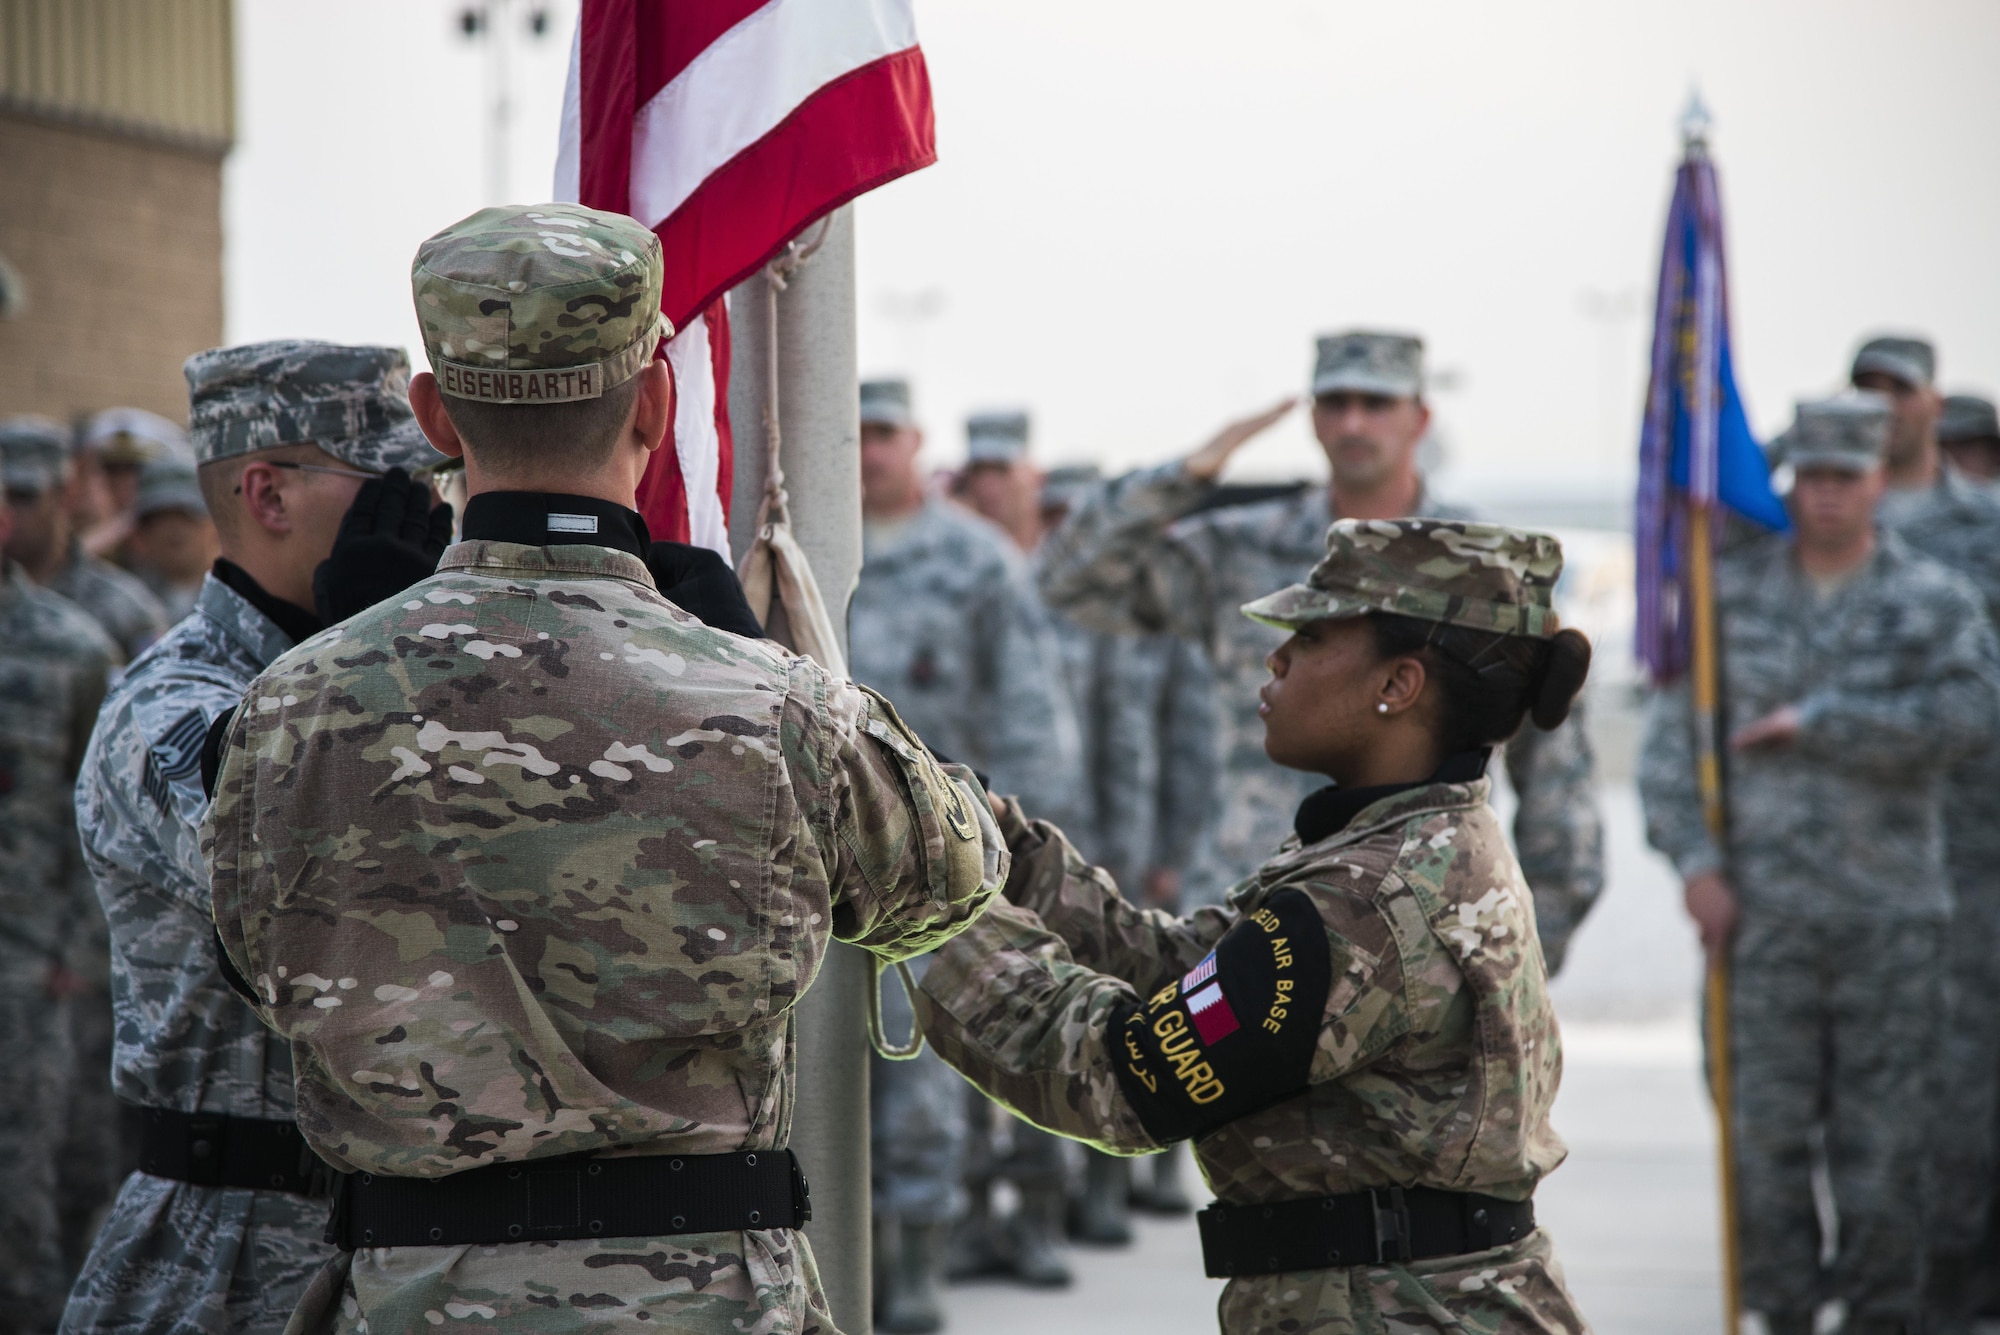 U.S. Air Force Airmen lower an American flag during a retreat ceremony recognizing the fourteenth anniversary of Sept. 11, 2001, at Al Udeid Air Base, Qatar, Sept. 11, 2015. The retreat ceremony signals the end of the official duty day and serves as a ceremony for paying respect to the flag. In this ceremony, respect was paid to the flag and the memory of those lost on Sept. 11, 2001. (U.S. Air Force photo/Tech. Sgt. Rasheen Douglas)